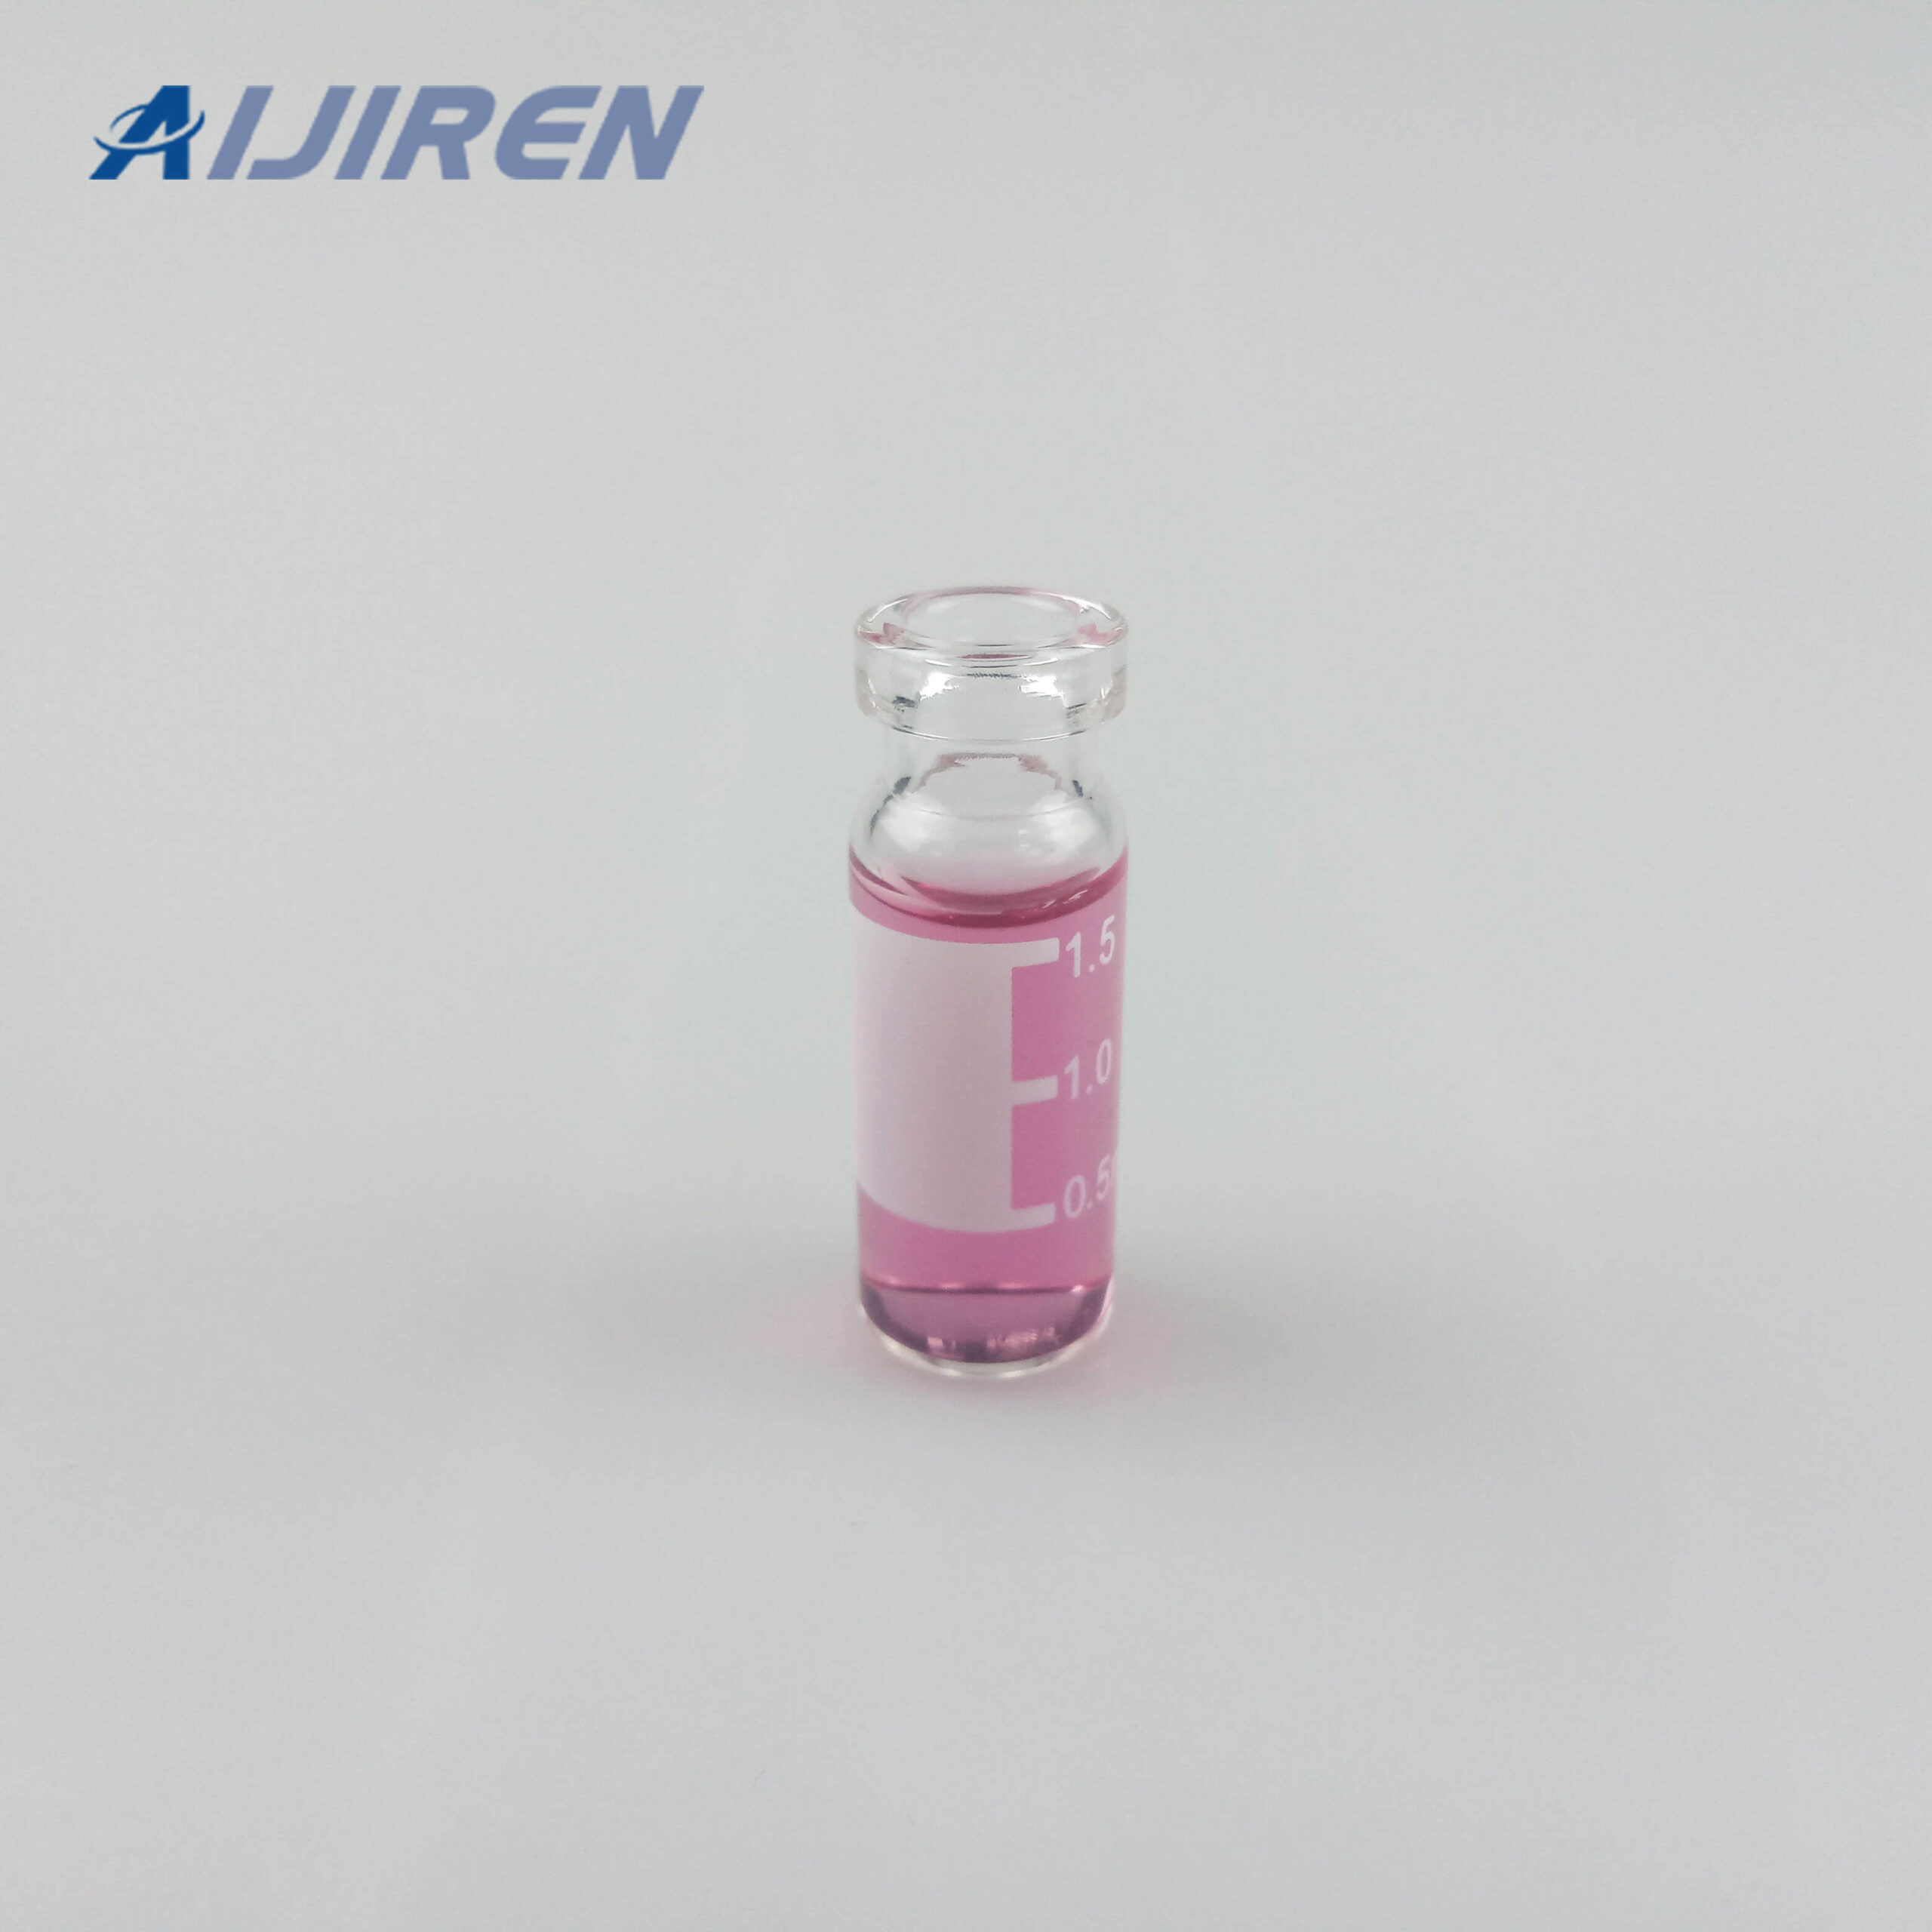 20ml headspace vial2ml Crimp Top Glass Vial with Label Area